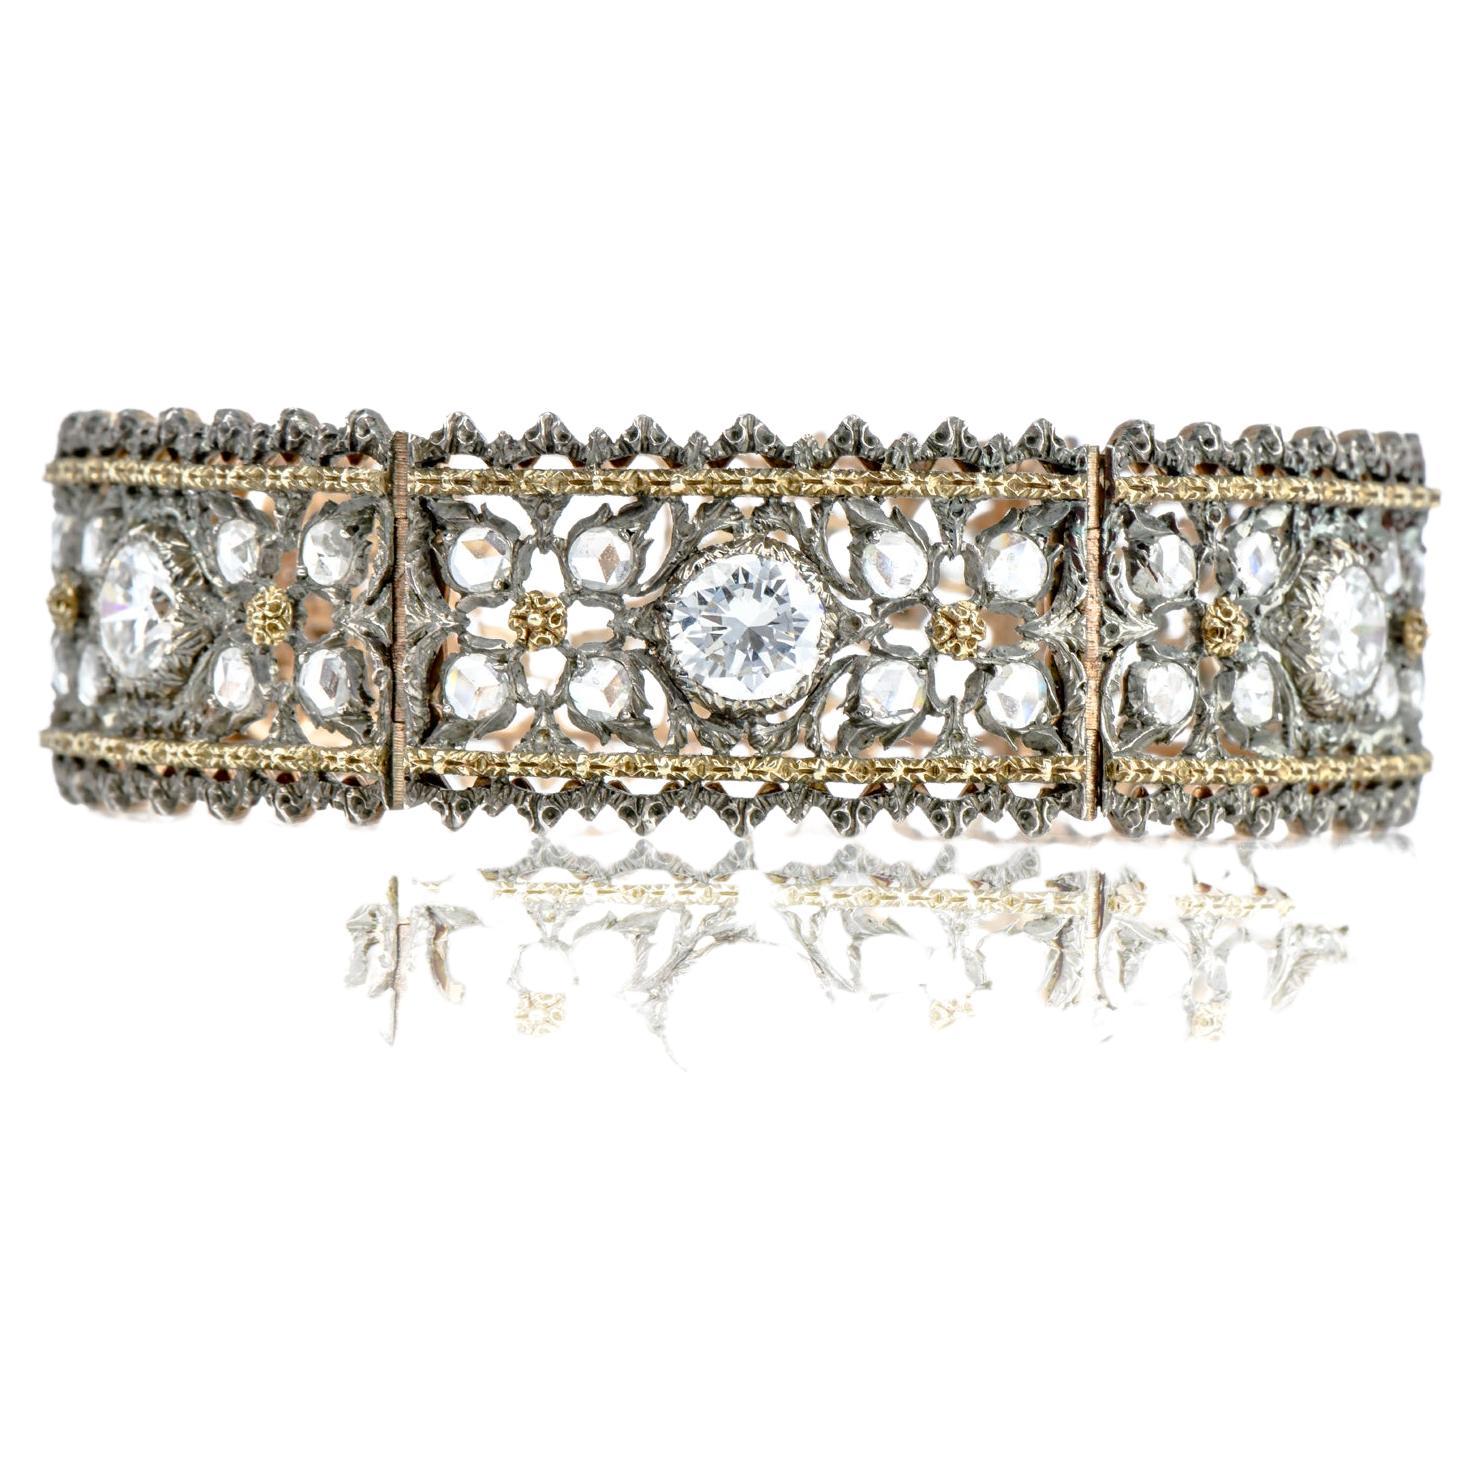 Exceed your expectation, with an antique Royal look!

This Expertly Executed Vintage 1950s Buccellati Diamond  Bracelet with an approx total weight of 32.2 grams.

Crafted in solid 18K yellow gold, topped with fine sterling silver hand-finished